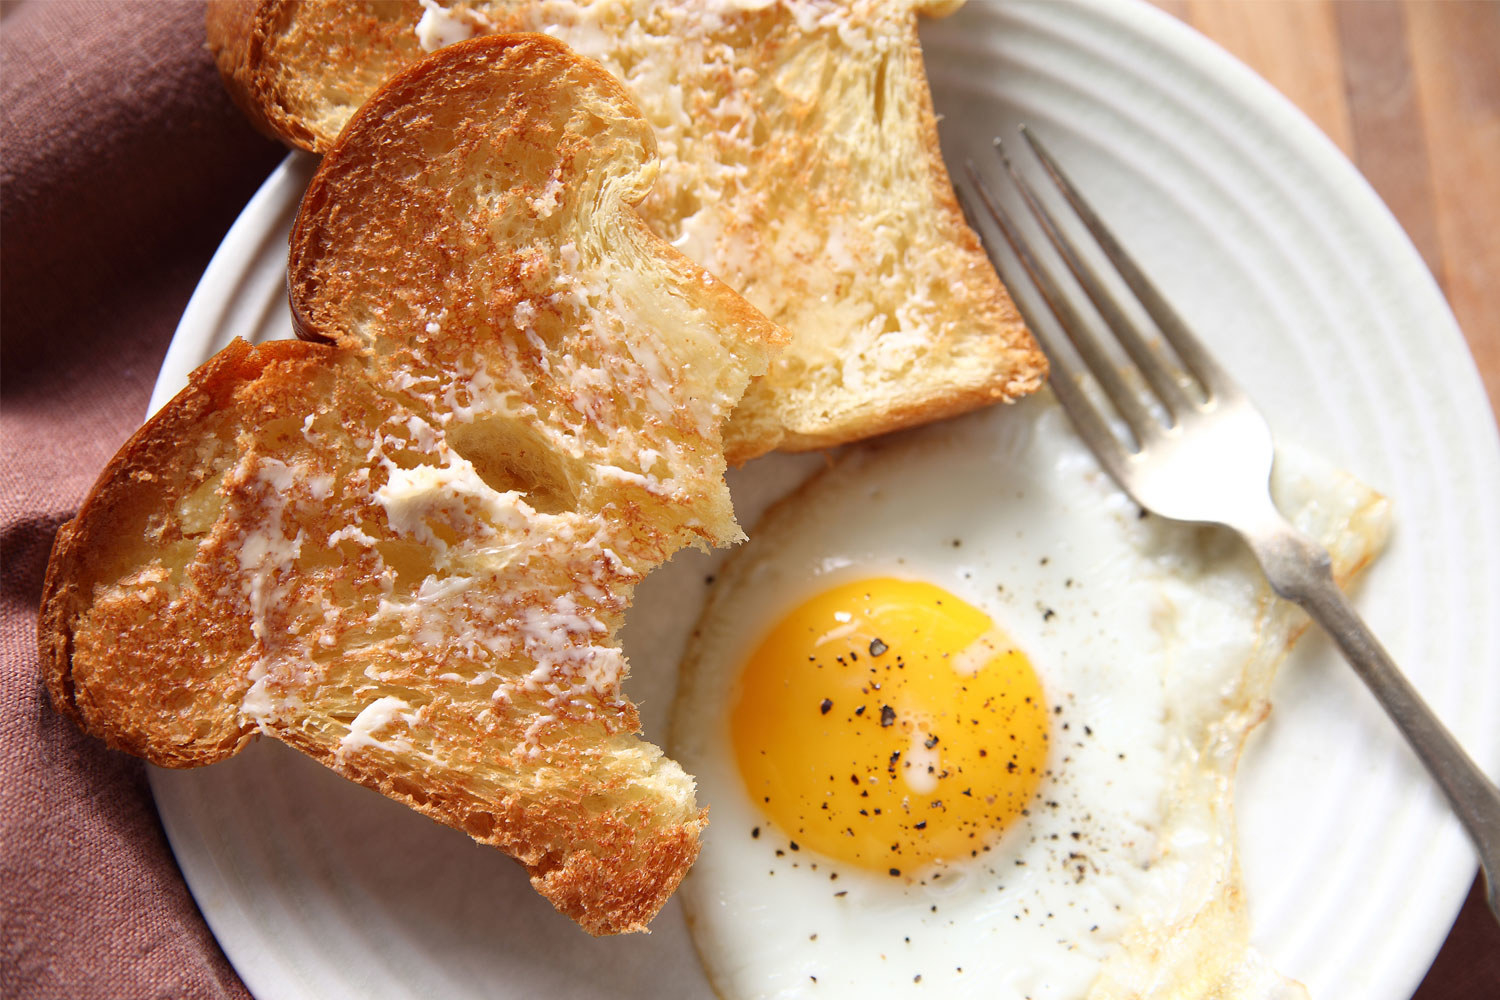 Toast with fried egg.